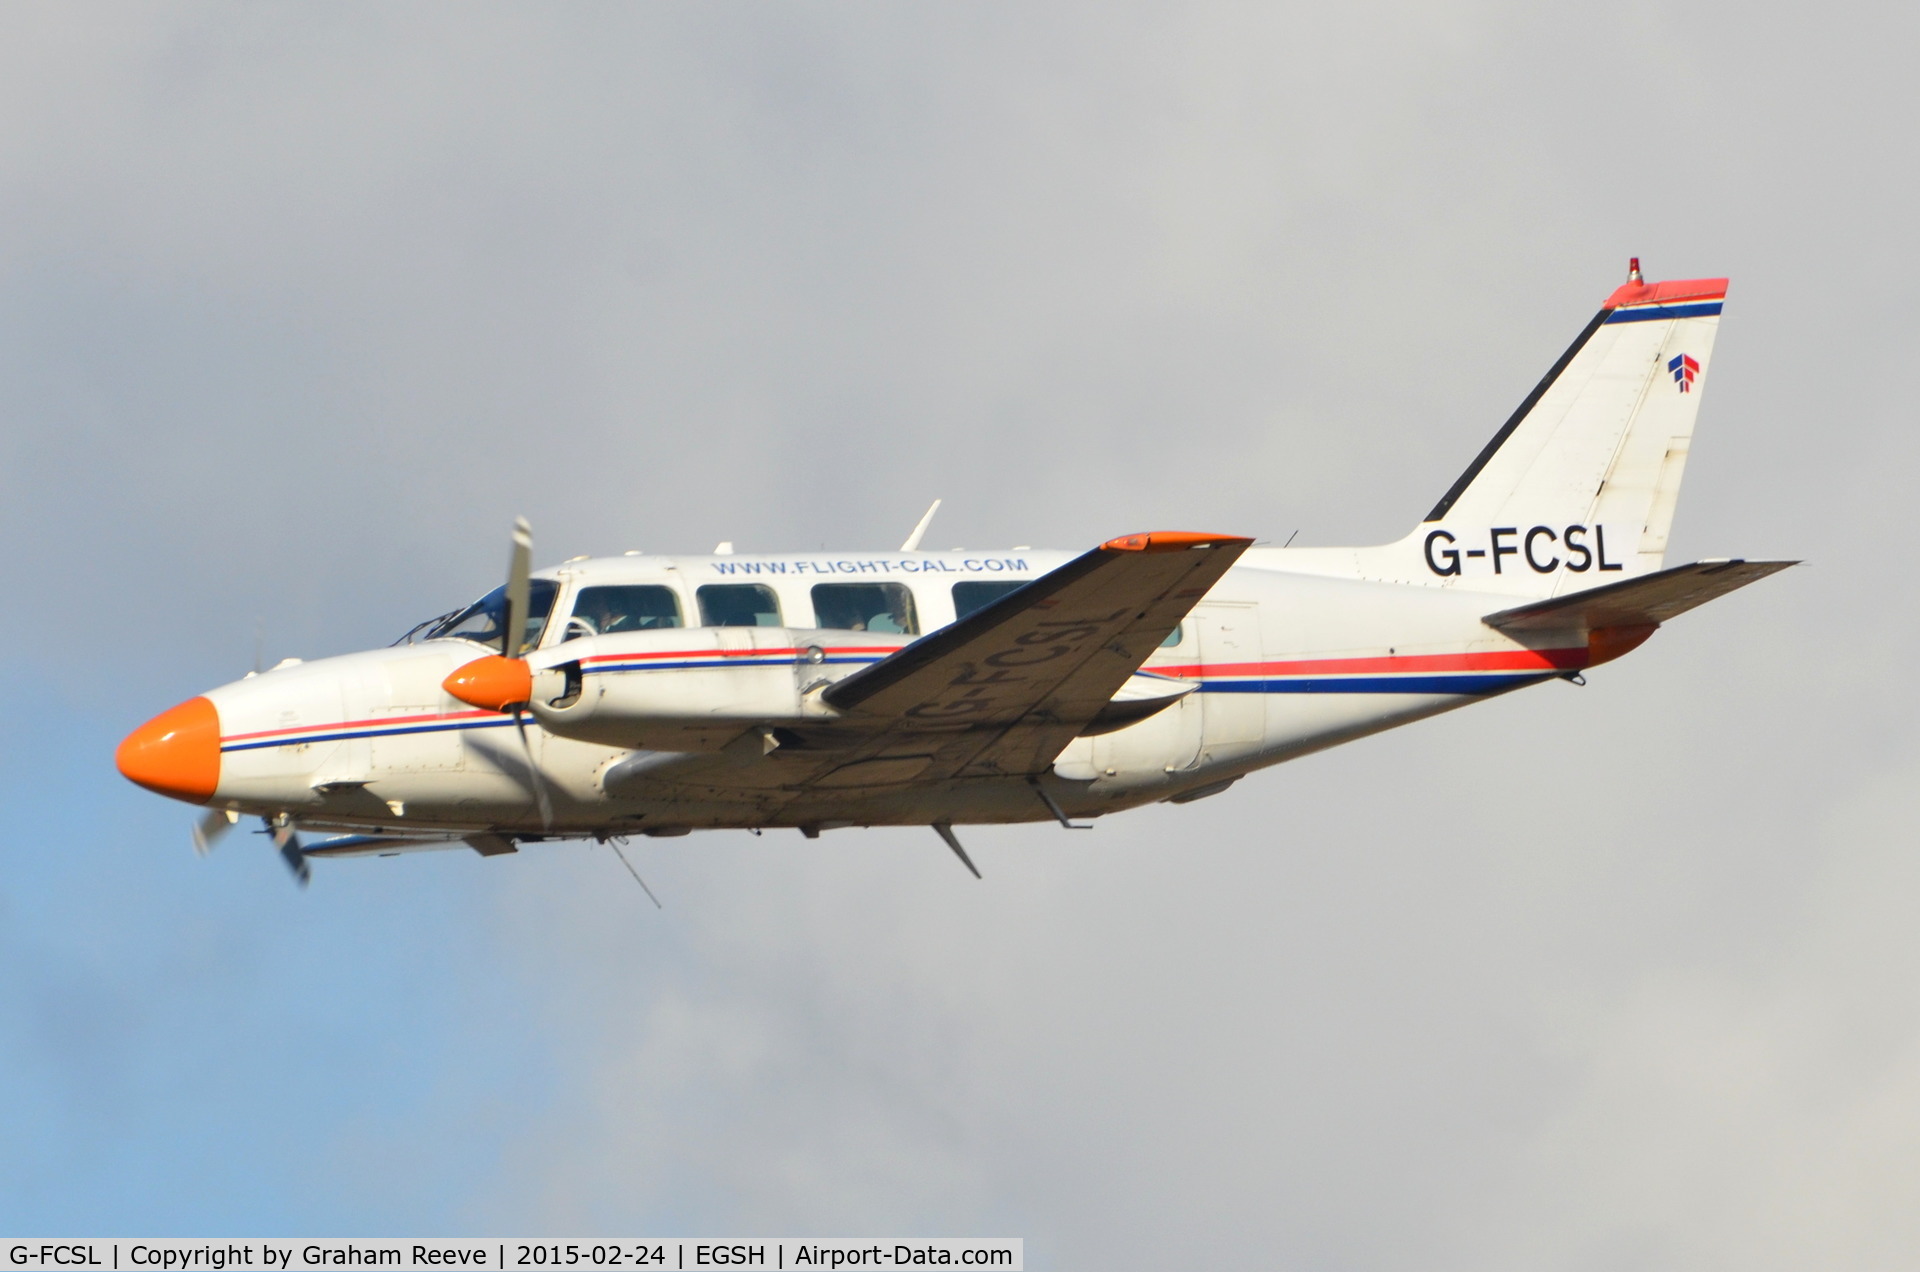 G-FCSL, 1972 Piper PA-31-350 Chieftain C/N 31-7852052, Engaged in calibration work at Norwich.